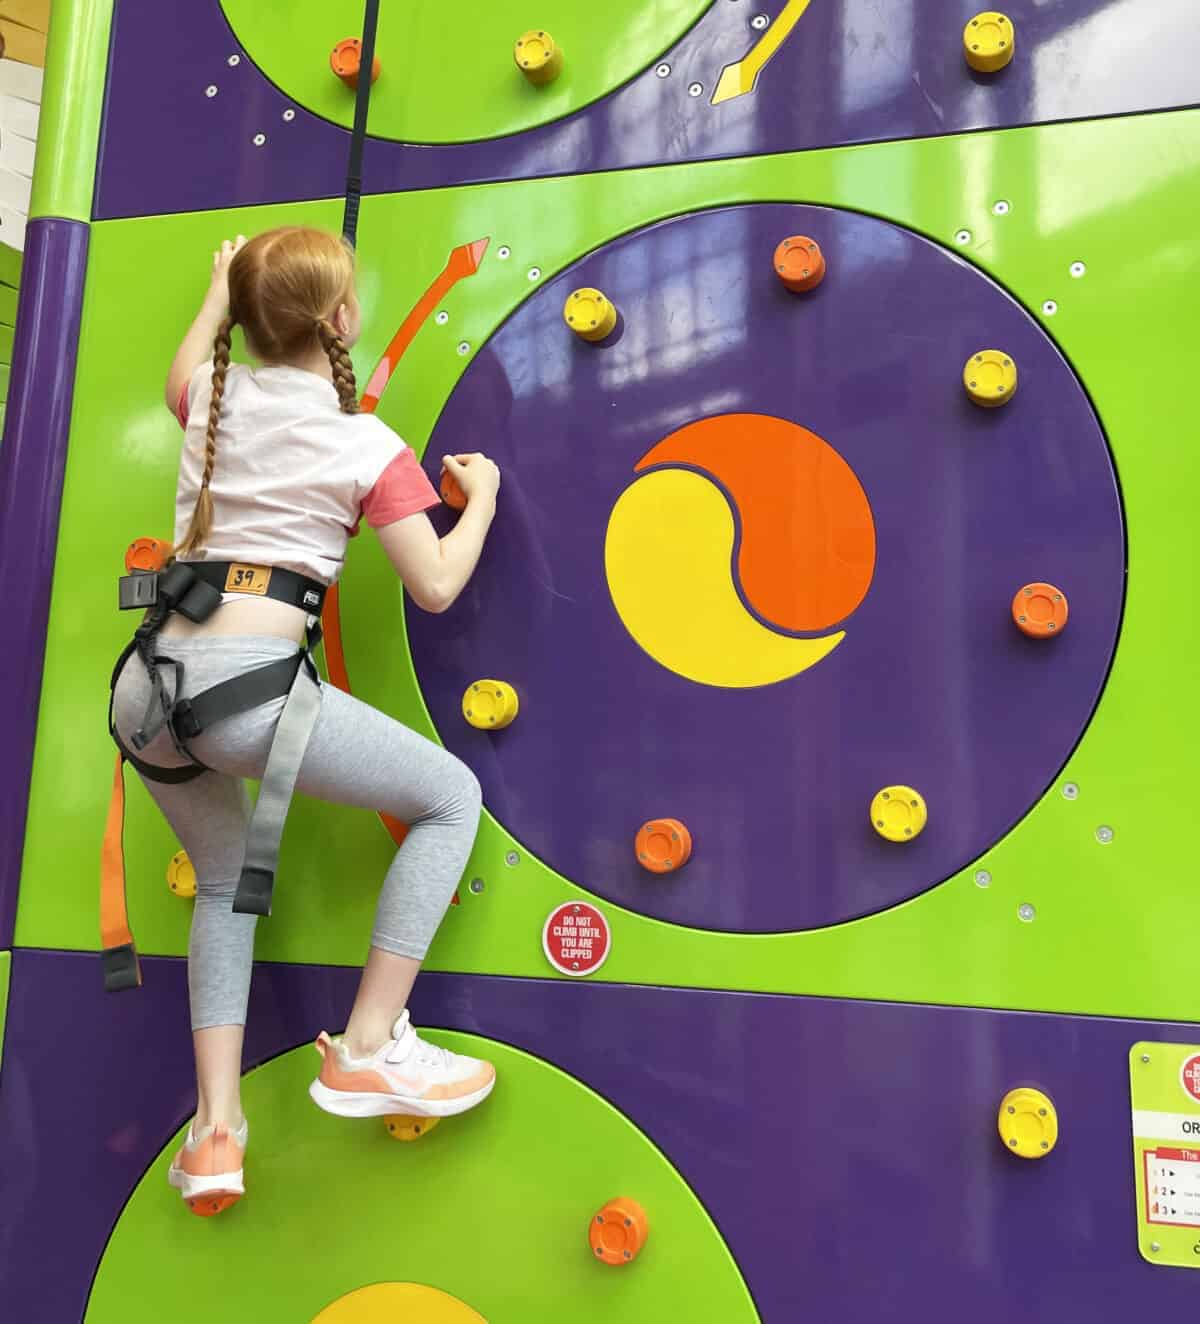 Clip n Climb at Places Leisure - Camberley, Surrey